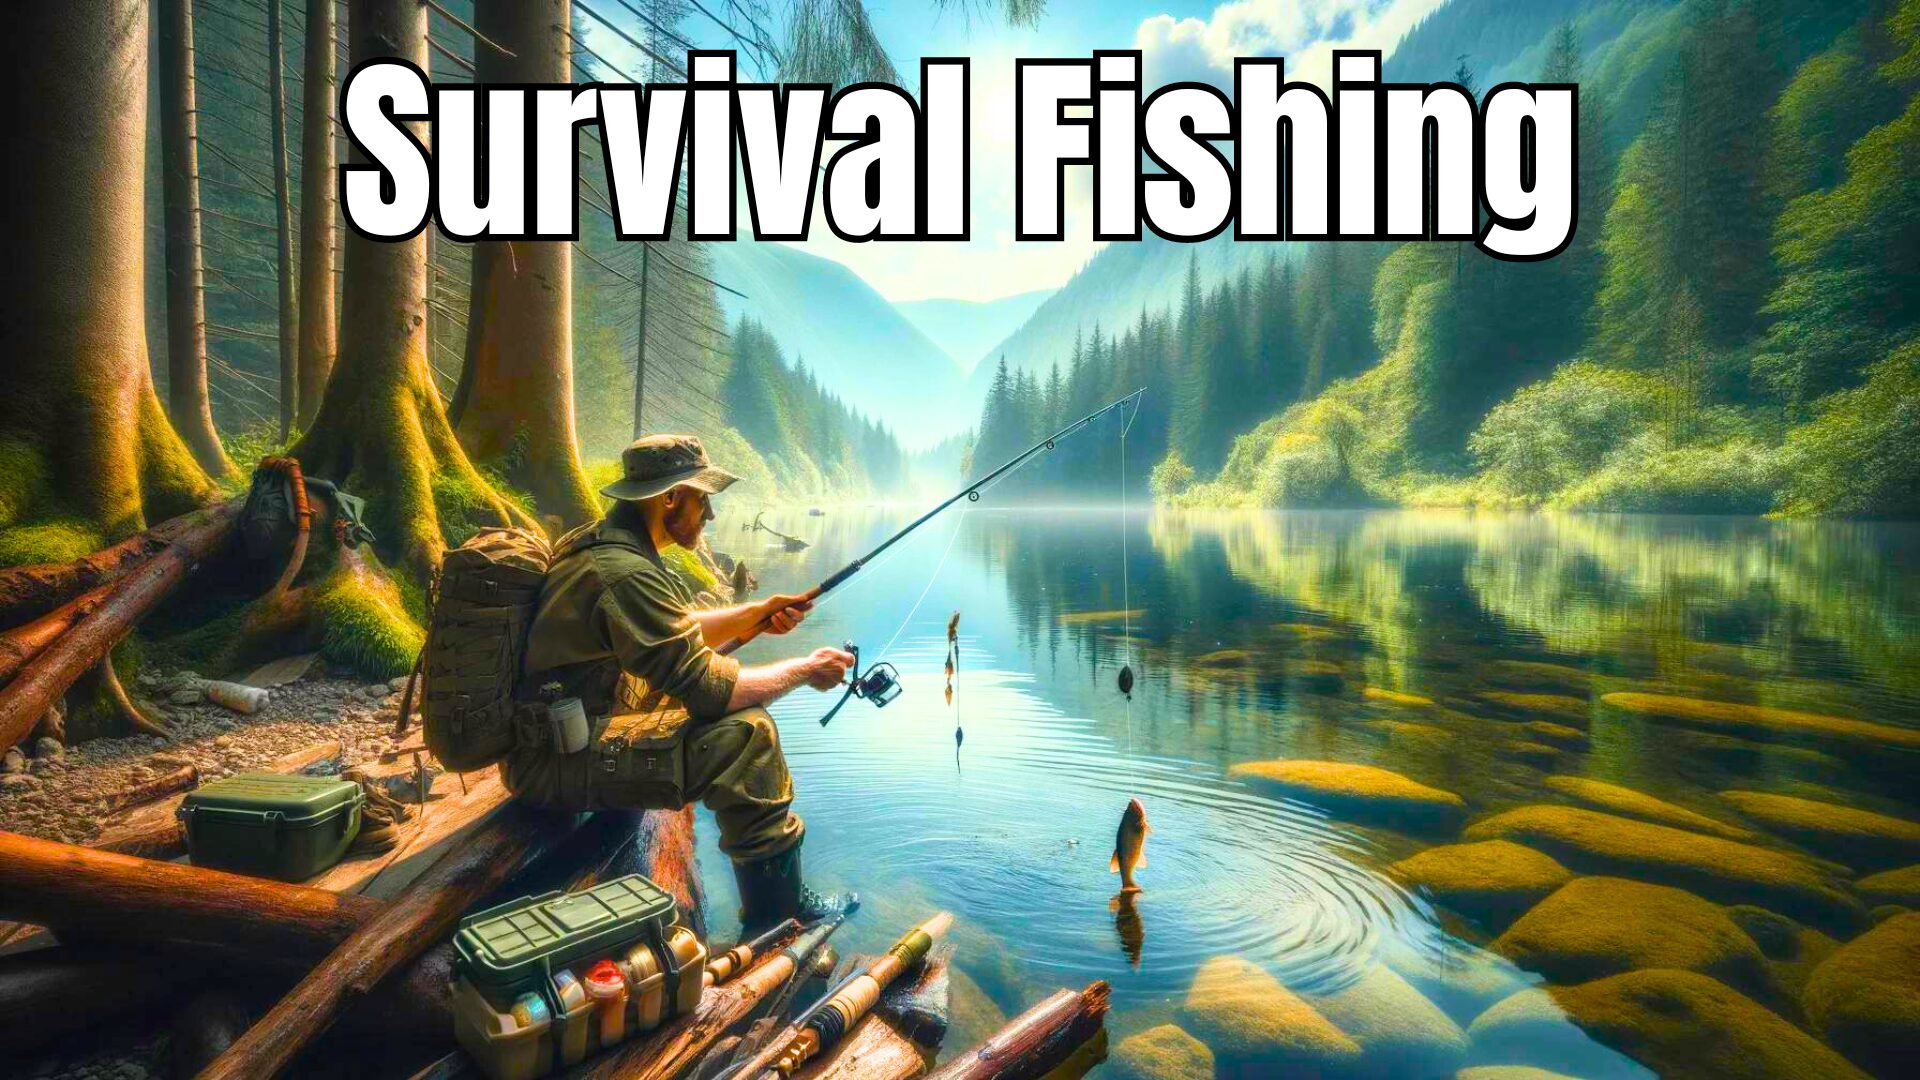 You are currently viewing Survival Fishing Guide: Catch Fish in Survival Situations